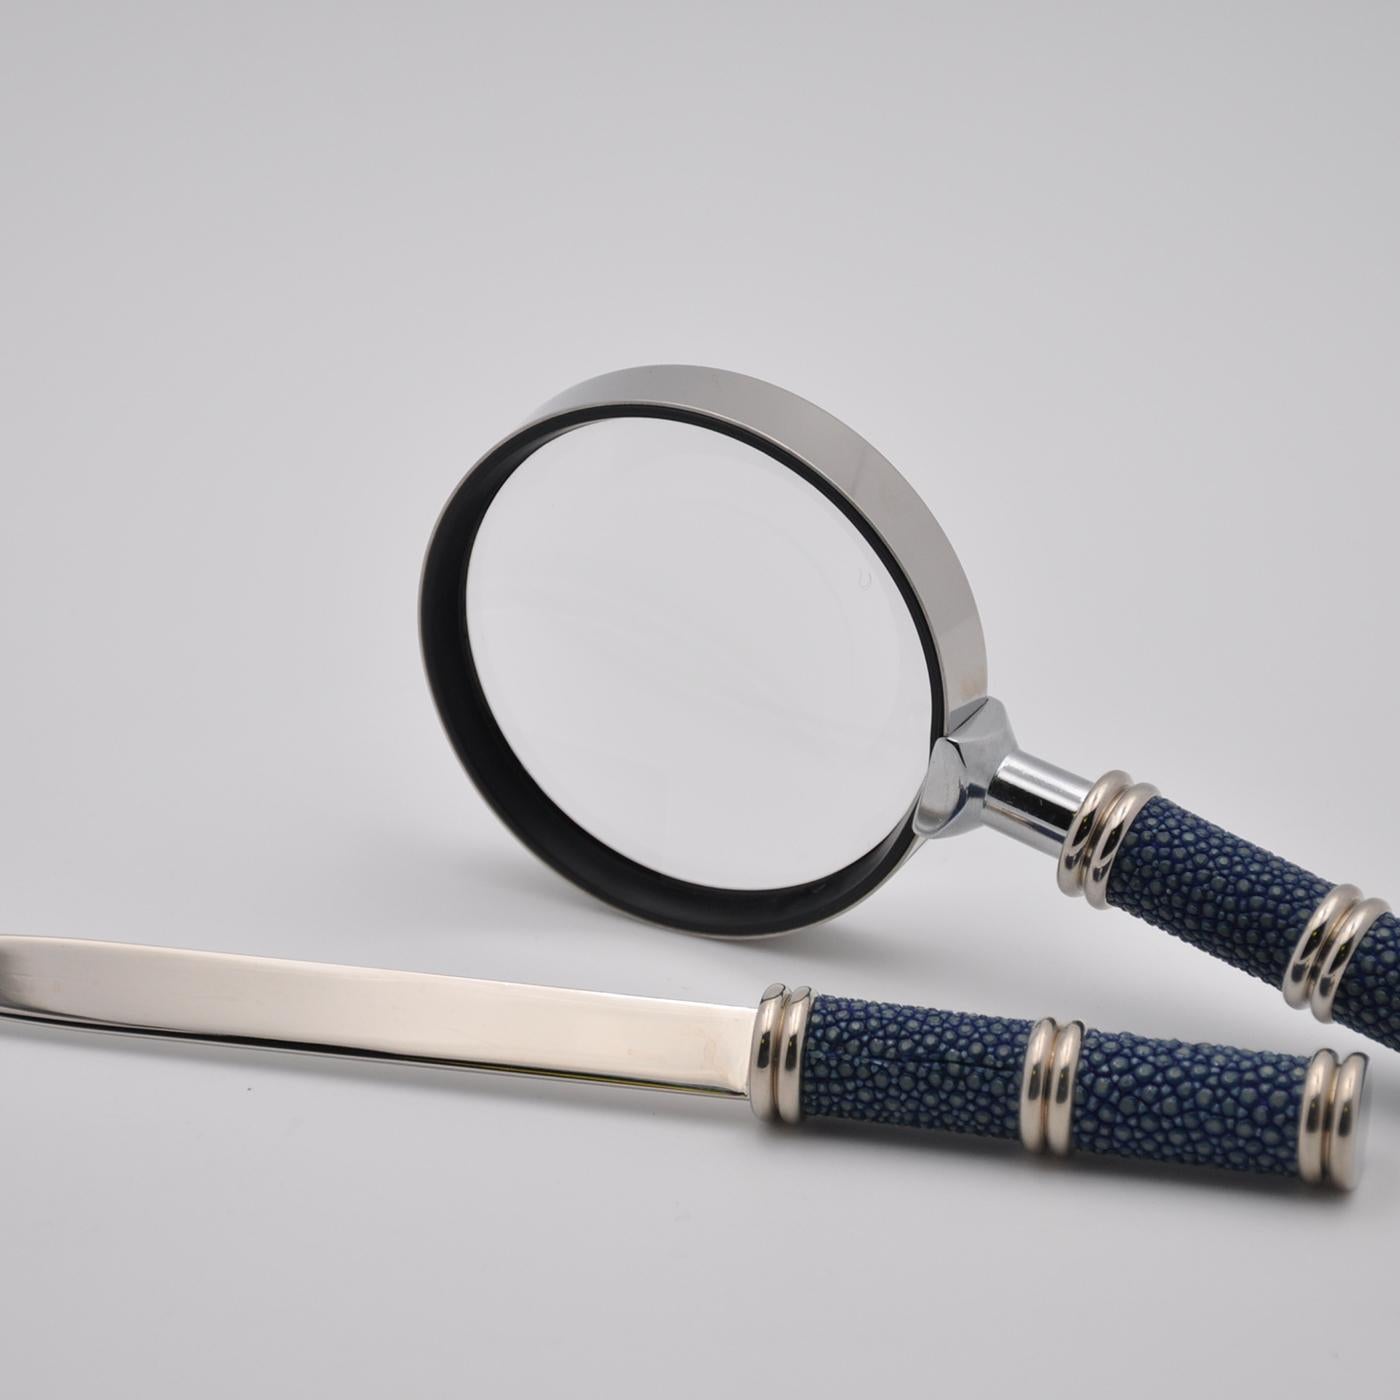 In Japan, shagreen was documented and preserved since started appearing on sword hilts and armor of Samurai during the Middle Ages, in part because its texture provided a reliable grip. Design Center, in 1990s, after patient, painstaking development